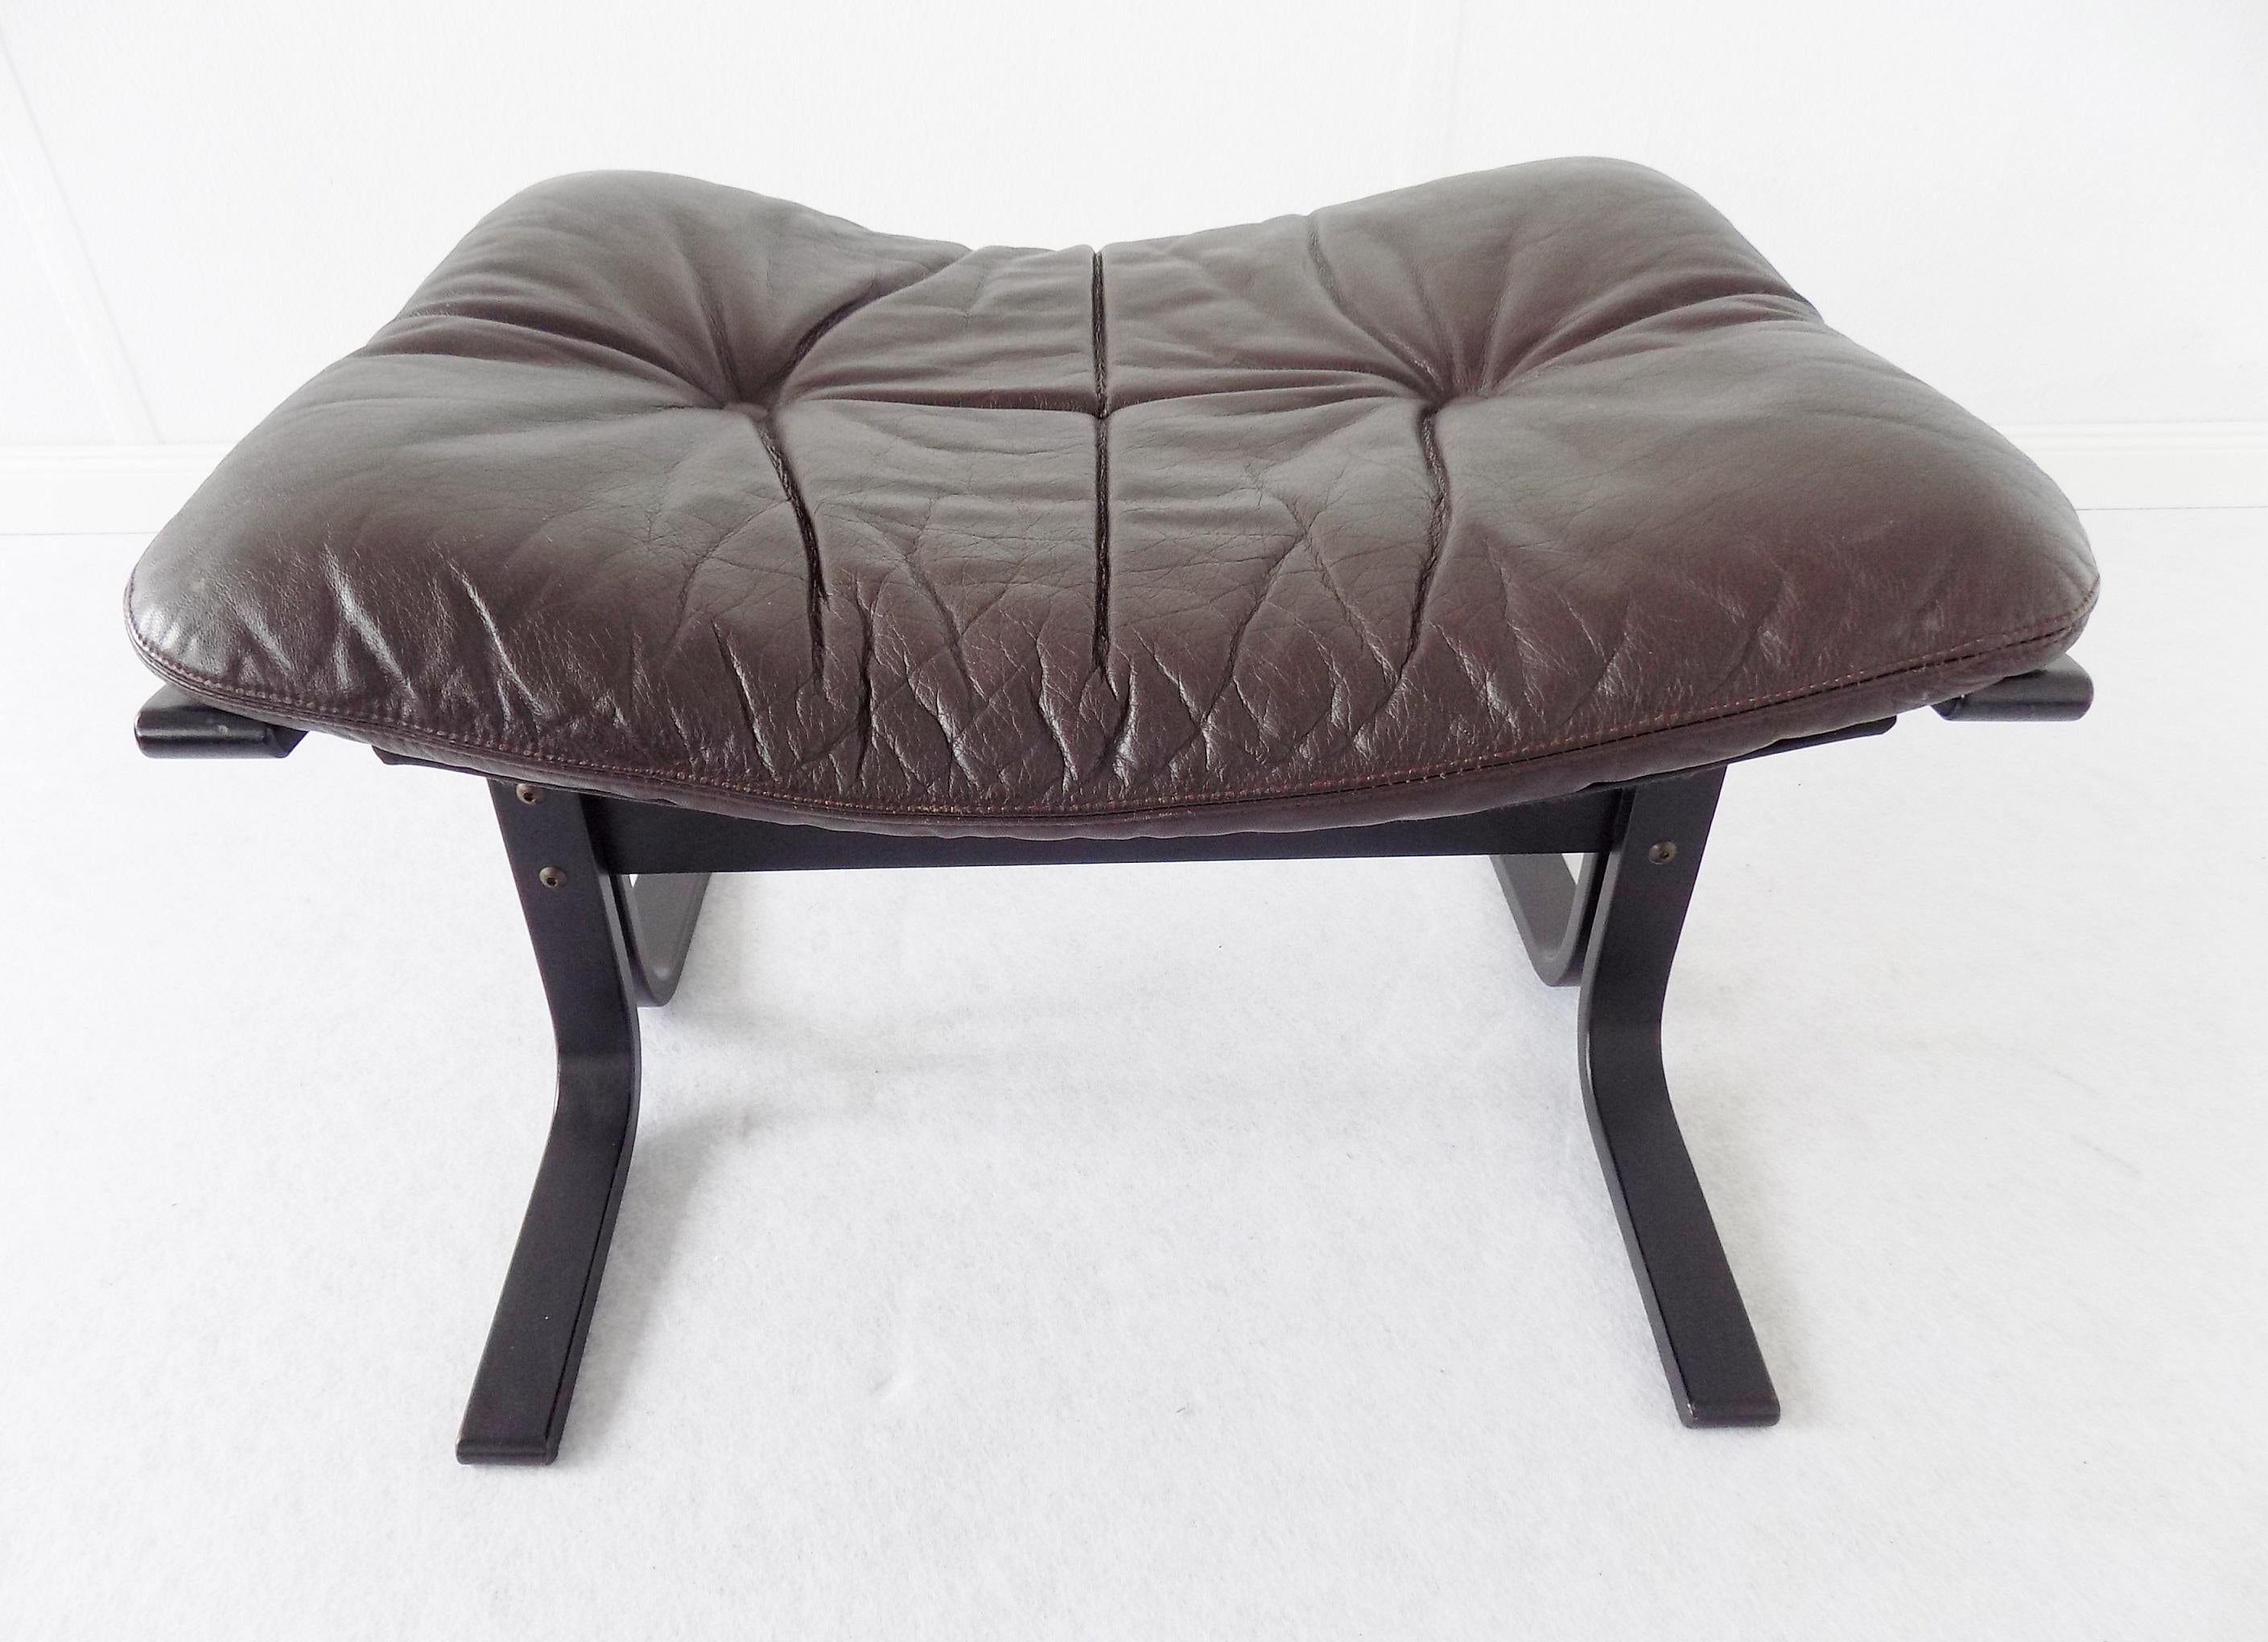 Leather Siesta ottoman by Ingmar Relling for Westnofa